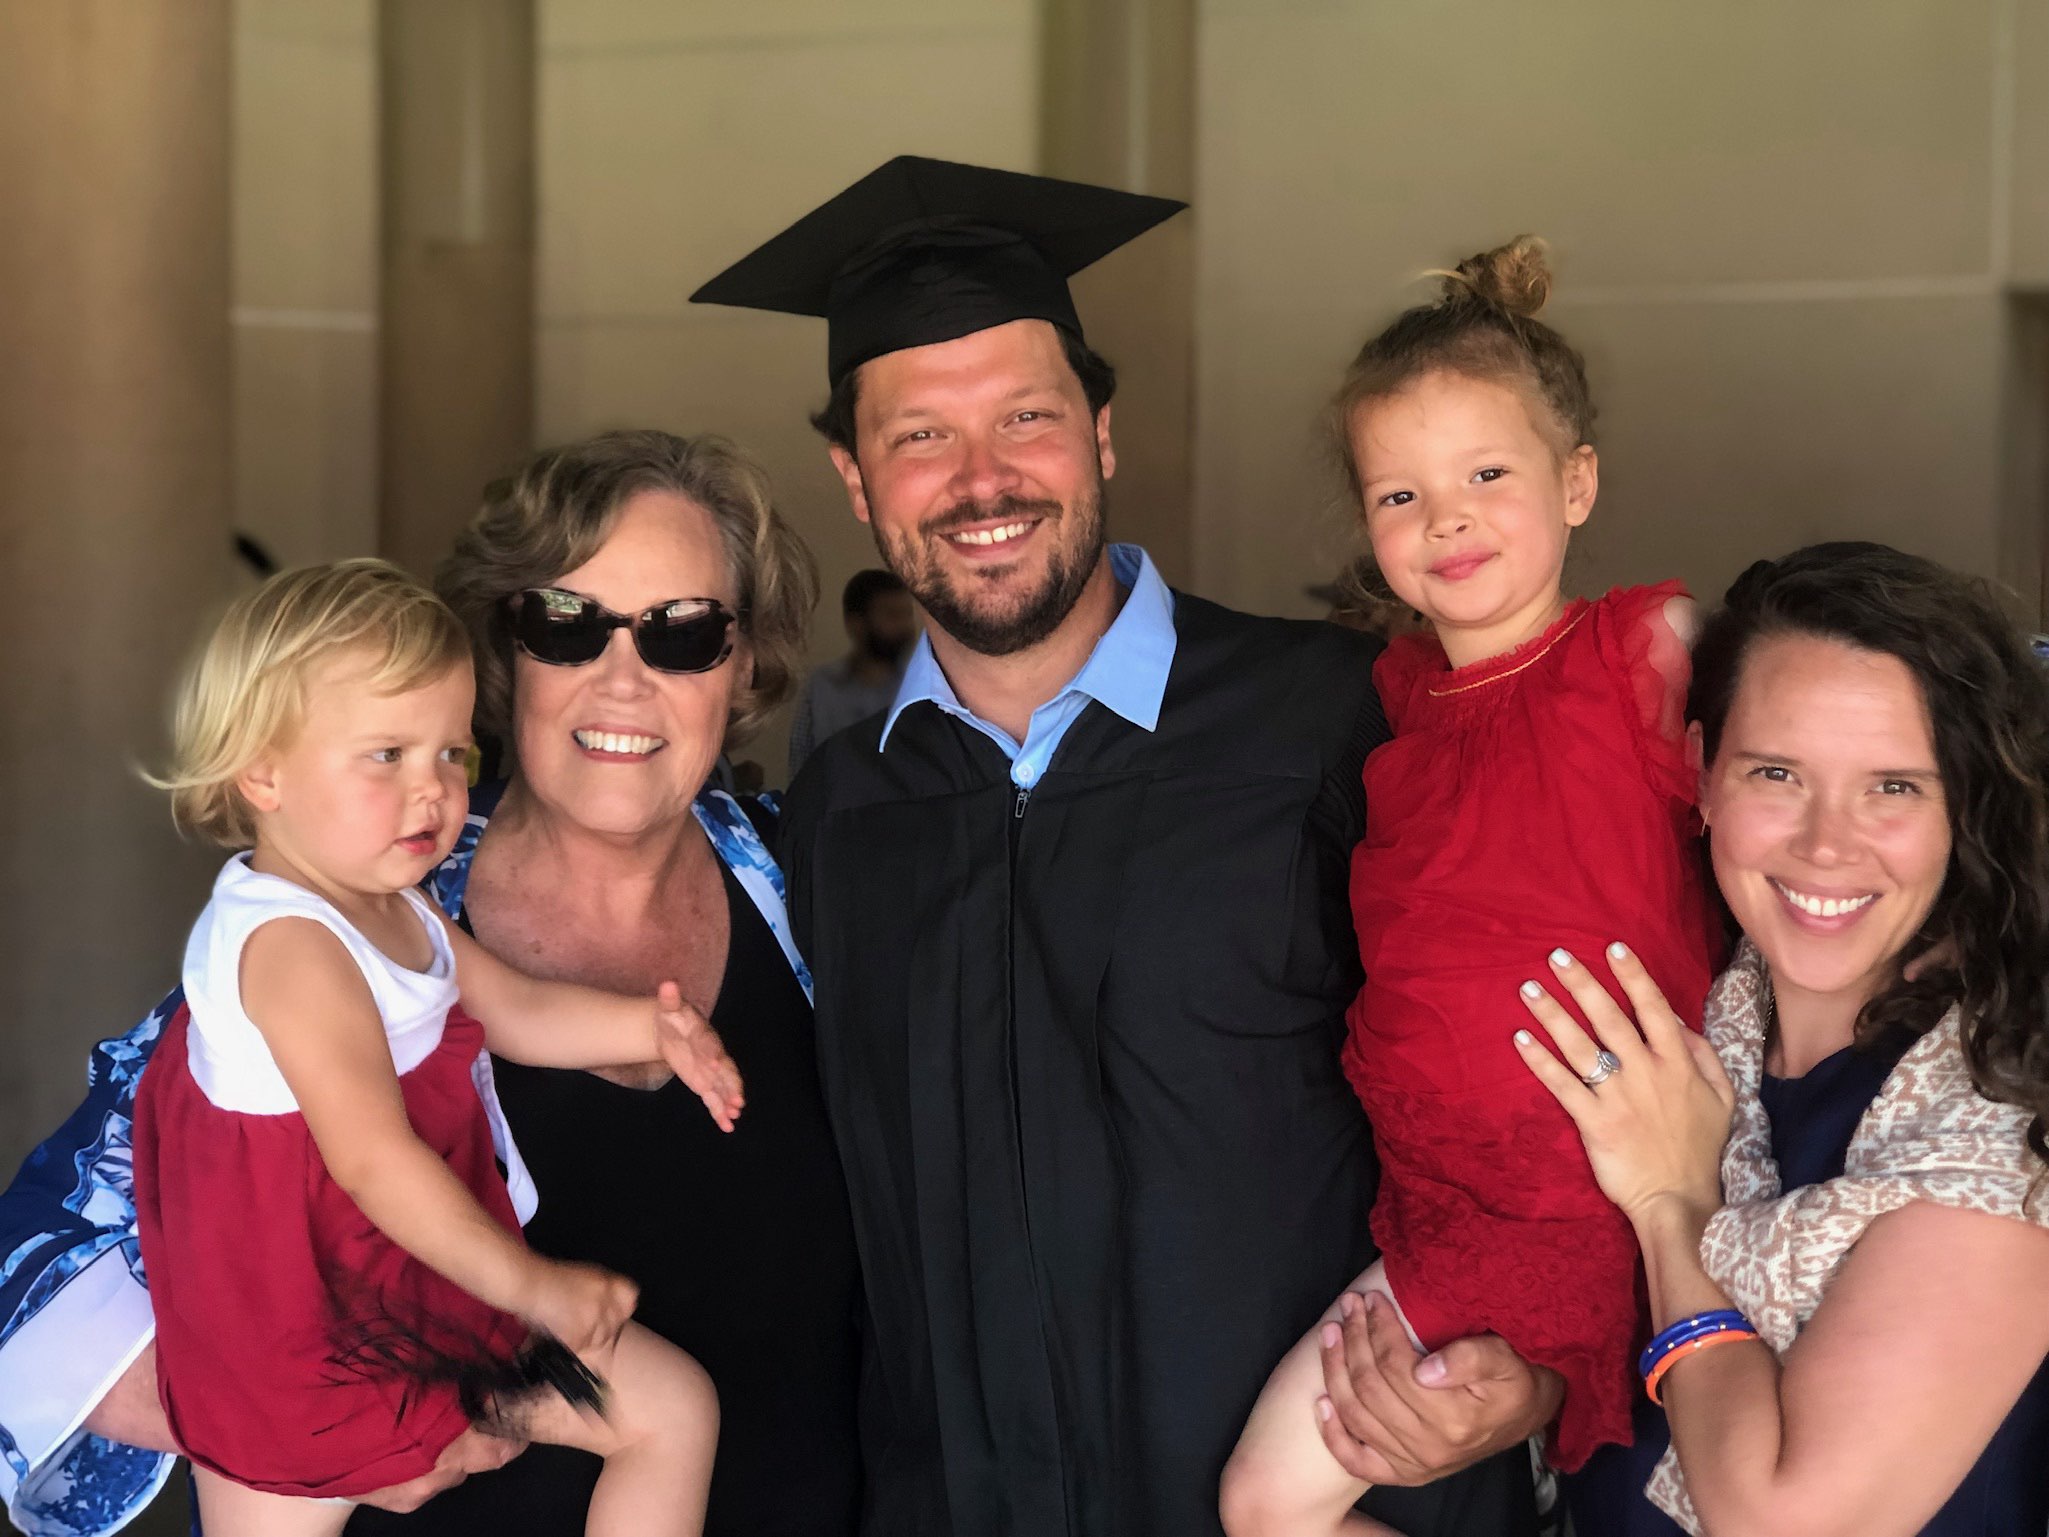 Fred Krynen with his family at graduation. Daughters Wren and Elodie, mother-in-law Jane Baxter and wife Erin. 